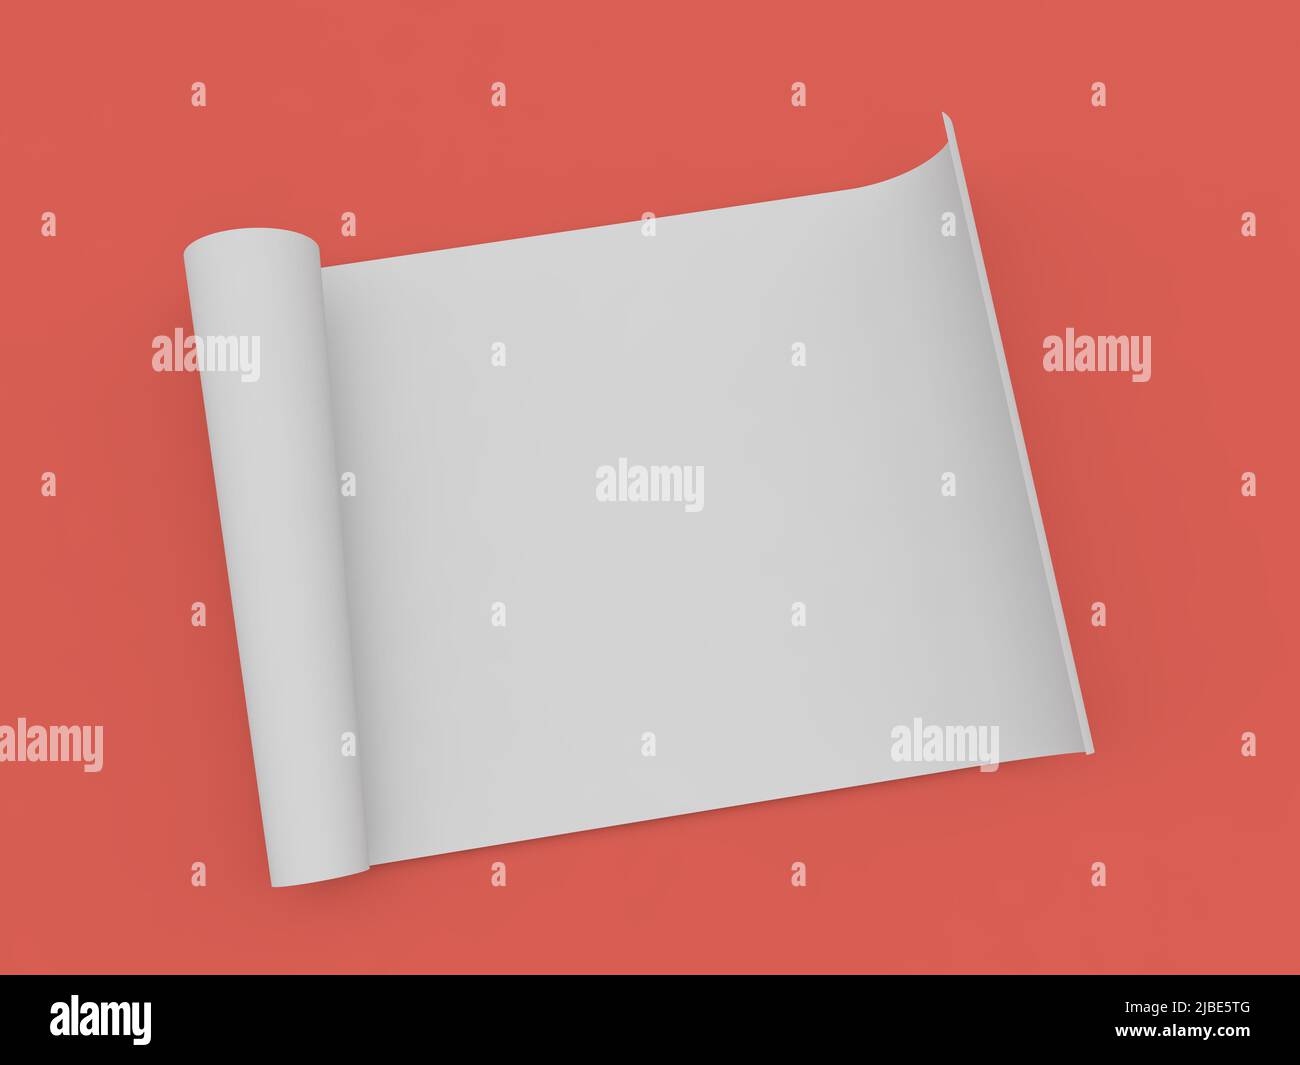 Rolled up roll of white paper A4 size on a red background. 3d render illustration. Stock Photo